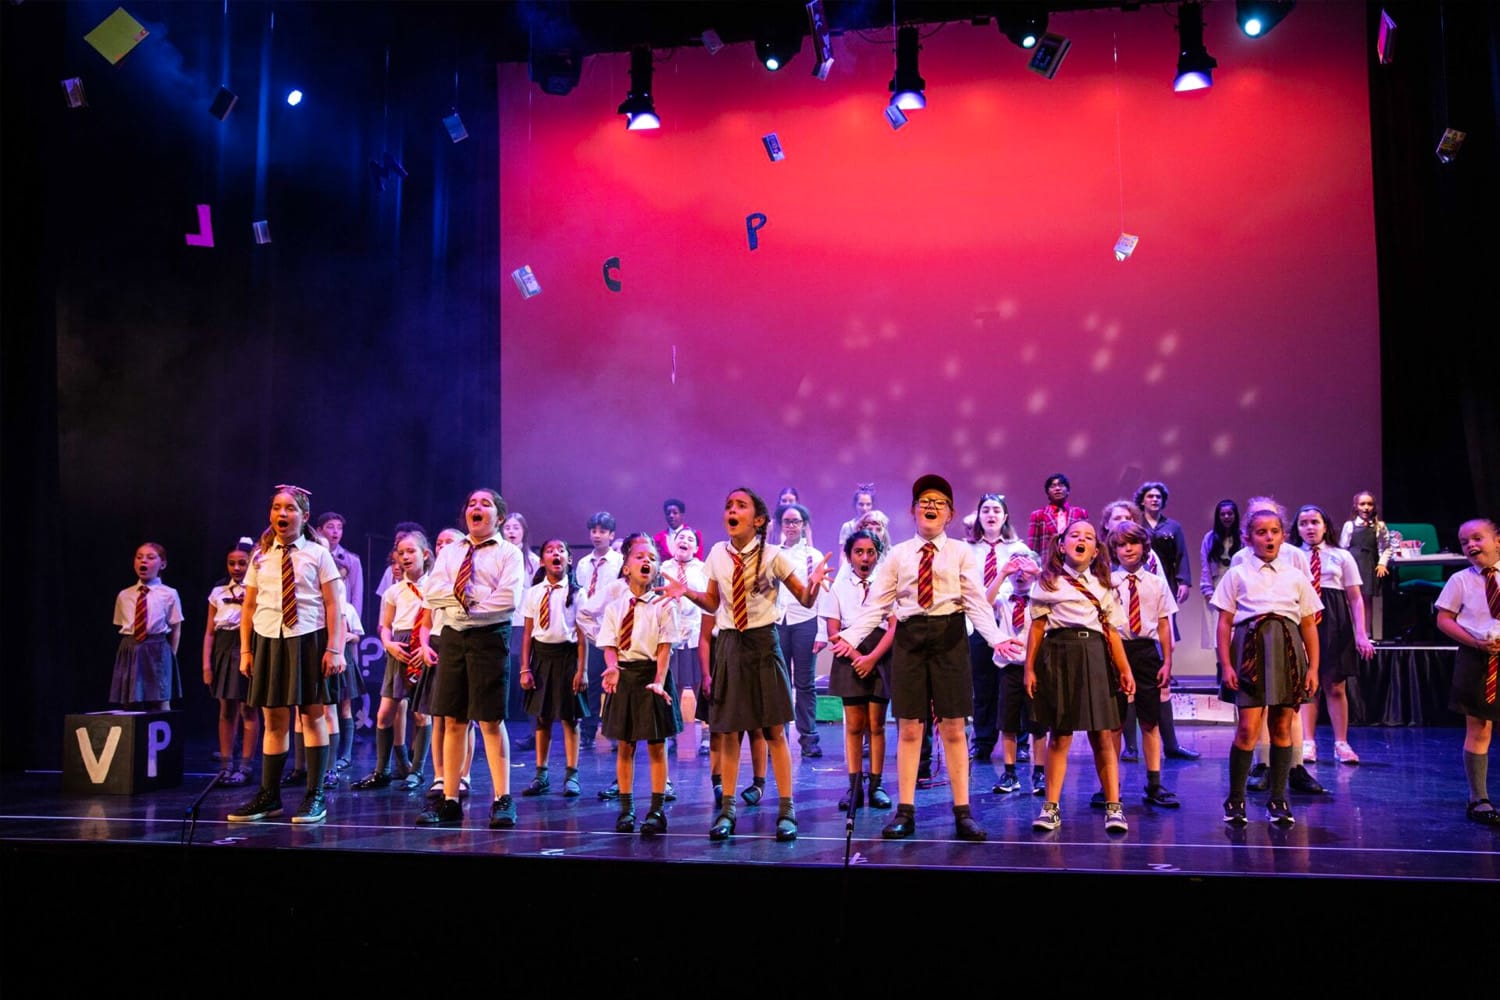 A diverse group of children stand onstage in a group performance of Matilda the musical. They all wear school uniforms with red ties and have their mouths open mid song. Alphabet letters hang down from the ceiling.